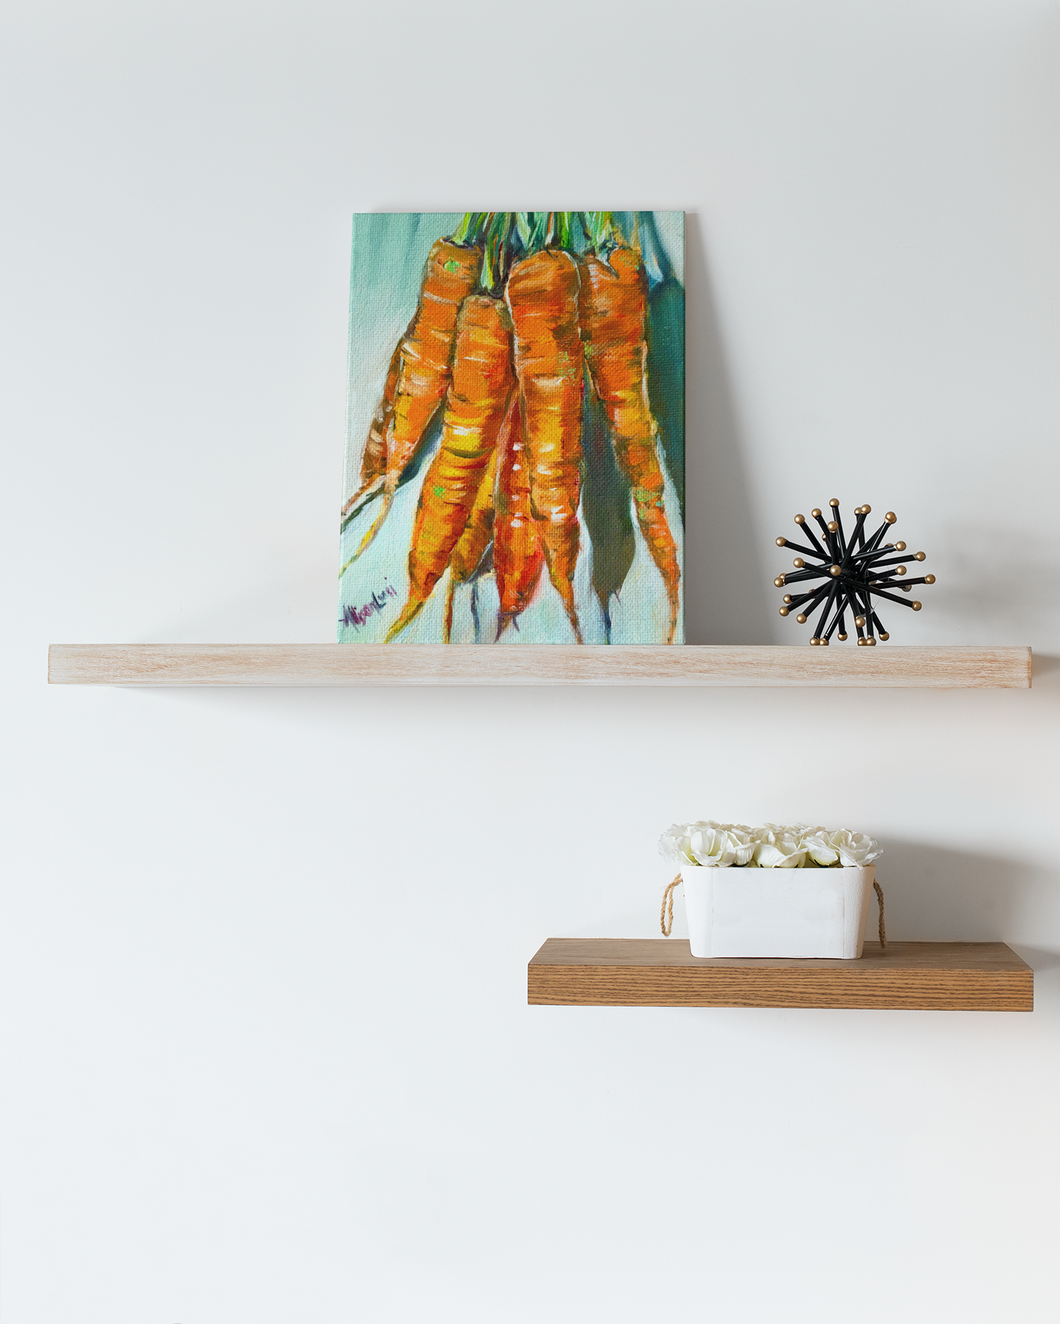 Keep Calm and Carrot On Gallery Wrapped Canvas Print